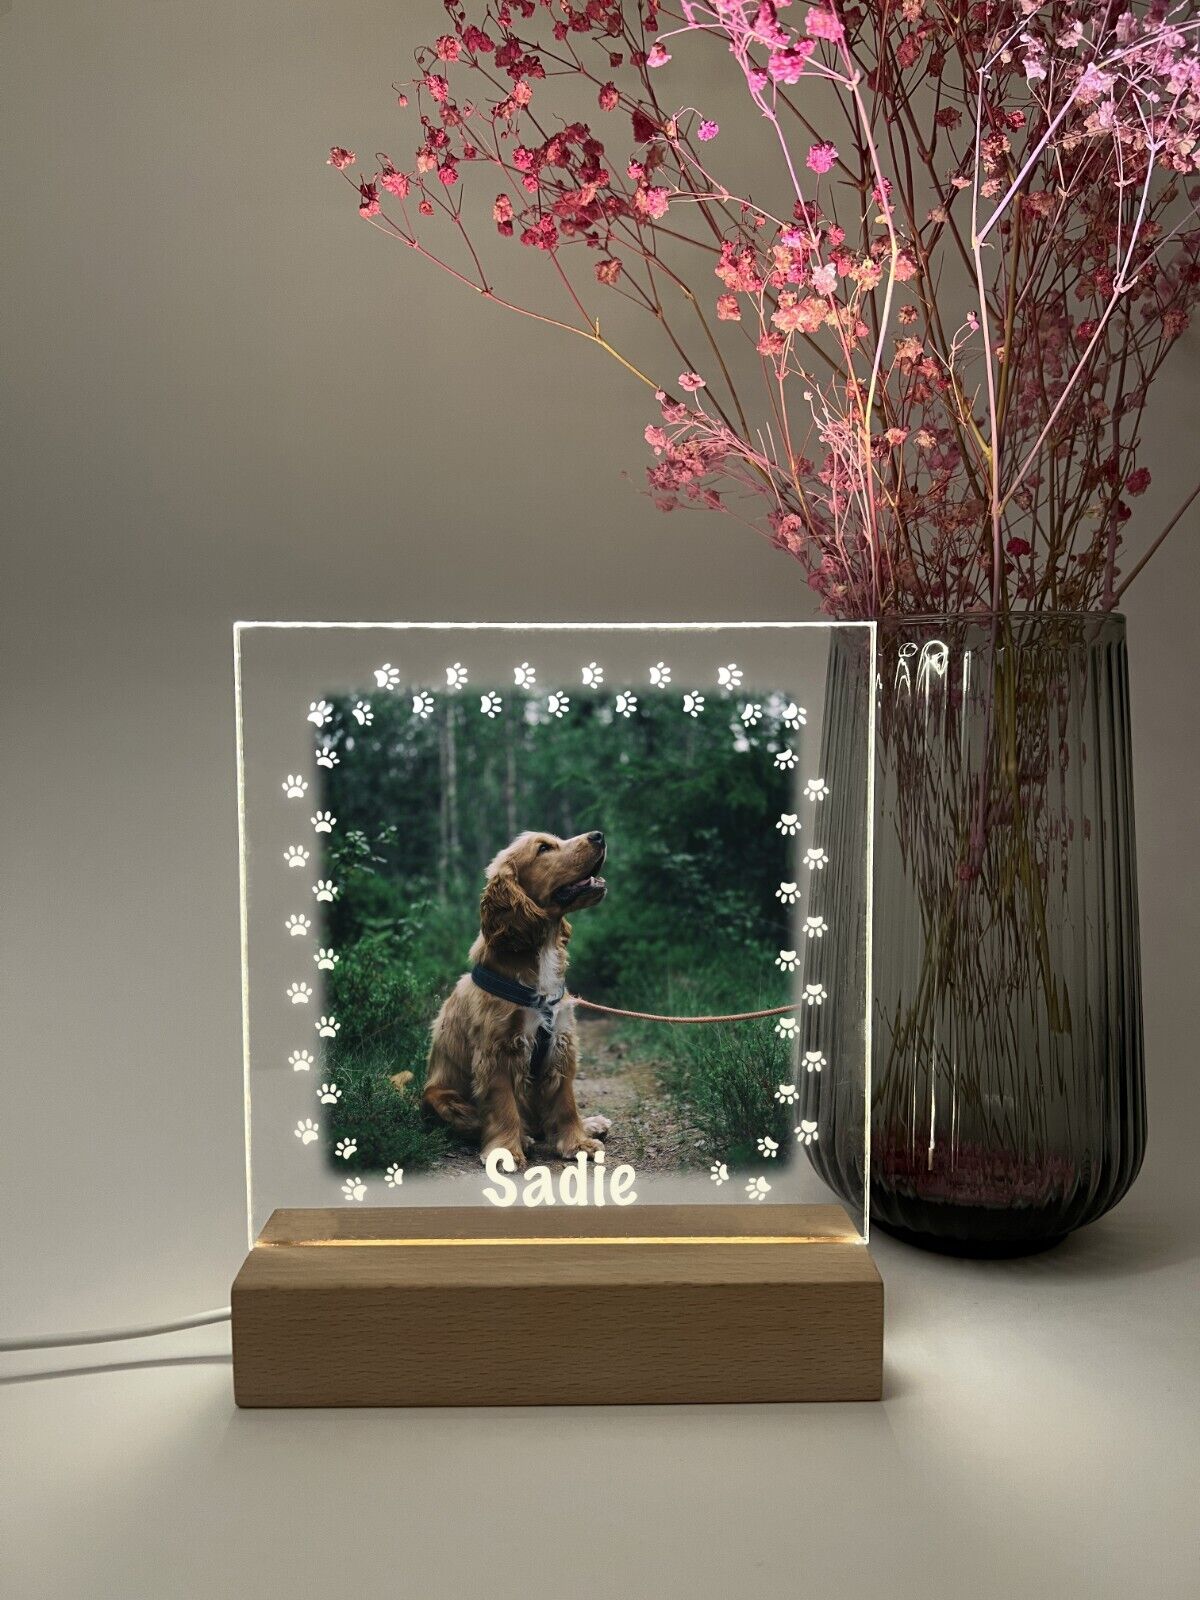 Personalized LED Light Up Wood Stand Pet Dogs Puppy Paw Prints Gift